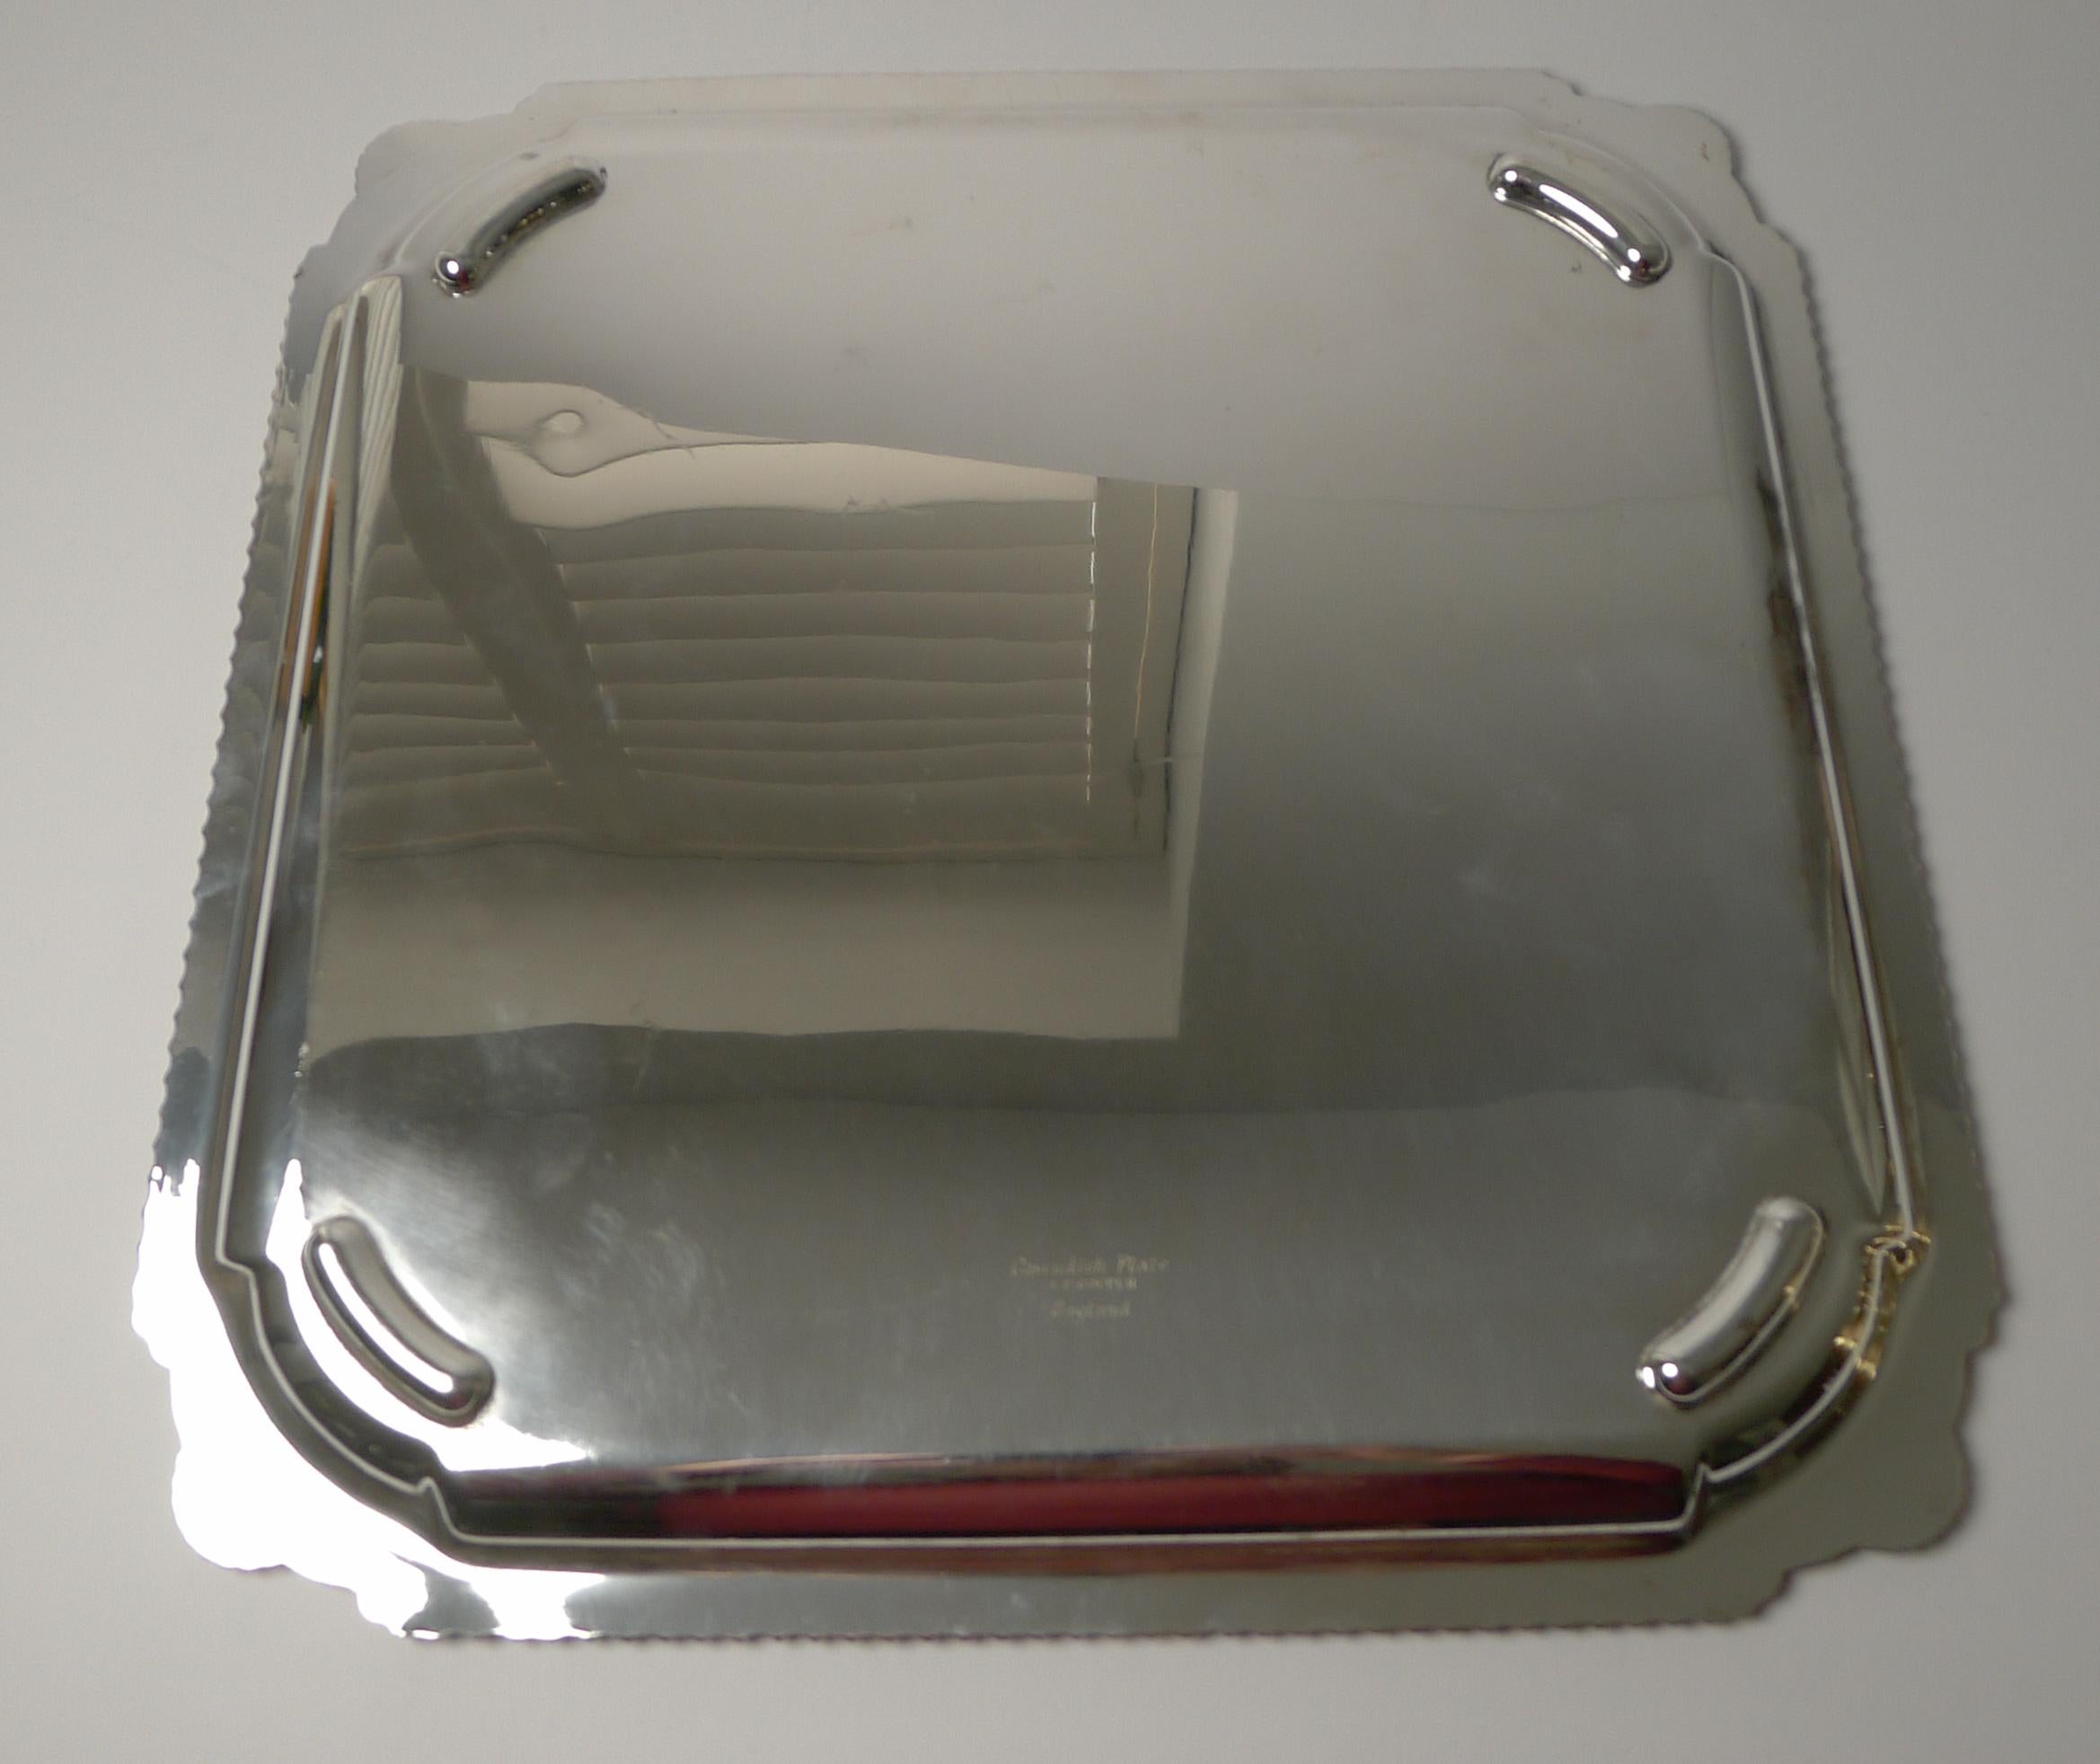 British Large English Square Silver Plated Cocktail / Drinks Tray c.1930